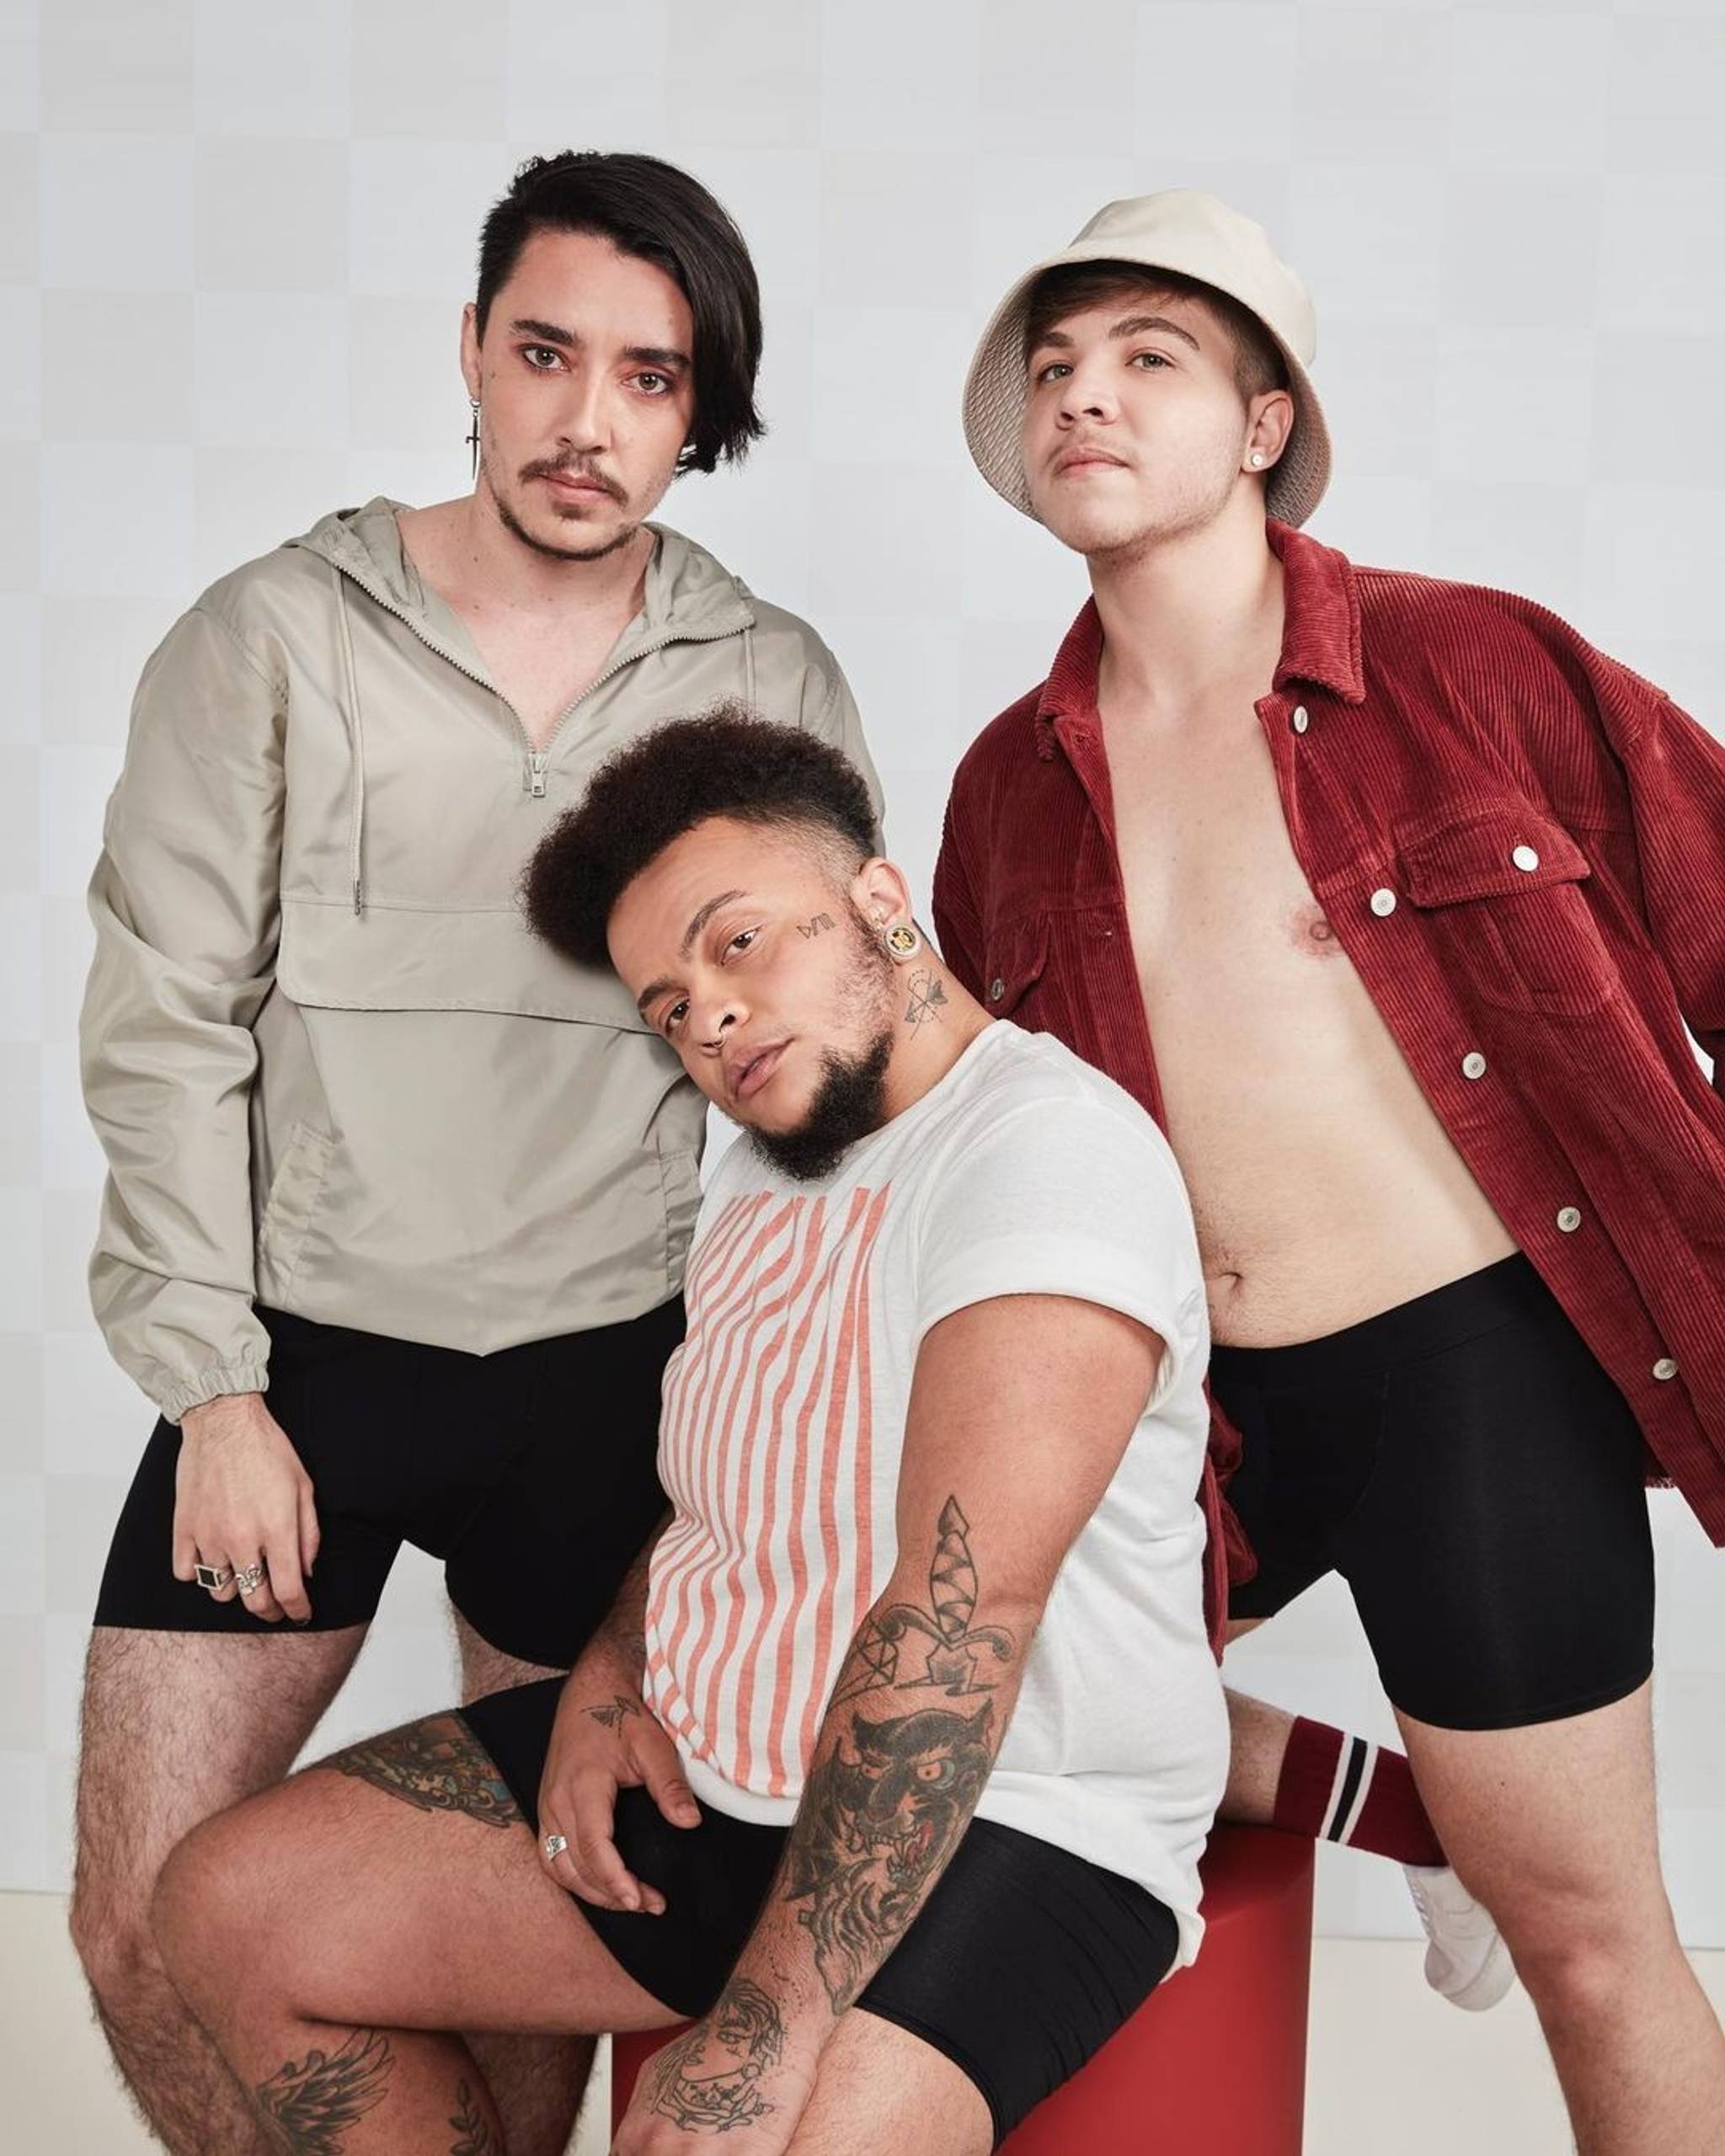 Pantys period boxers empower trans community